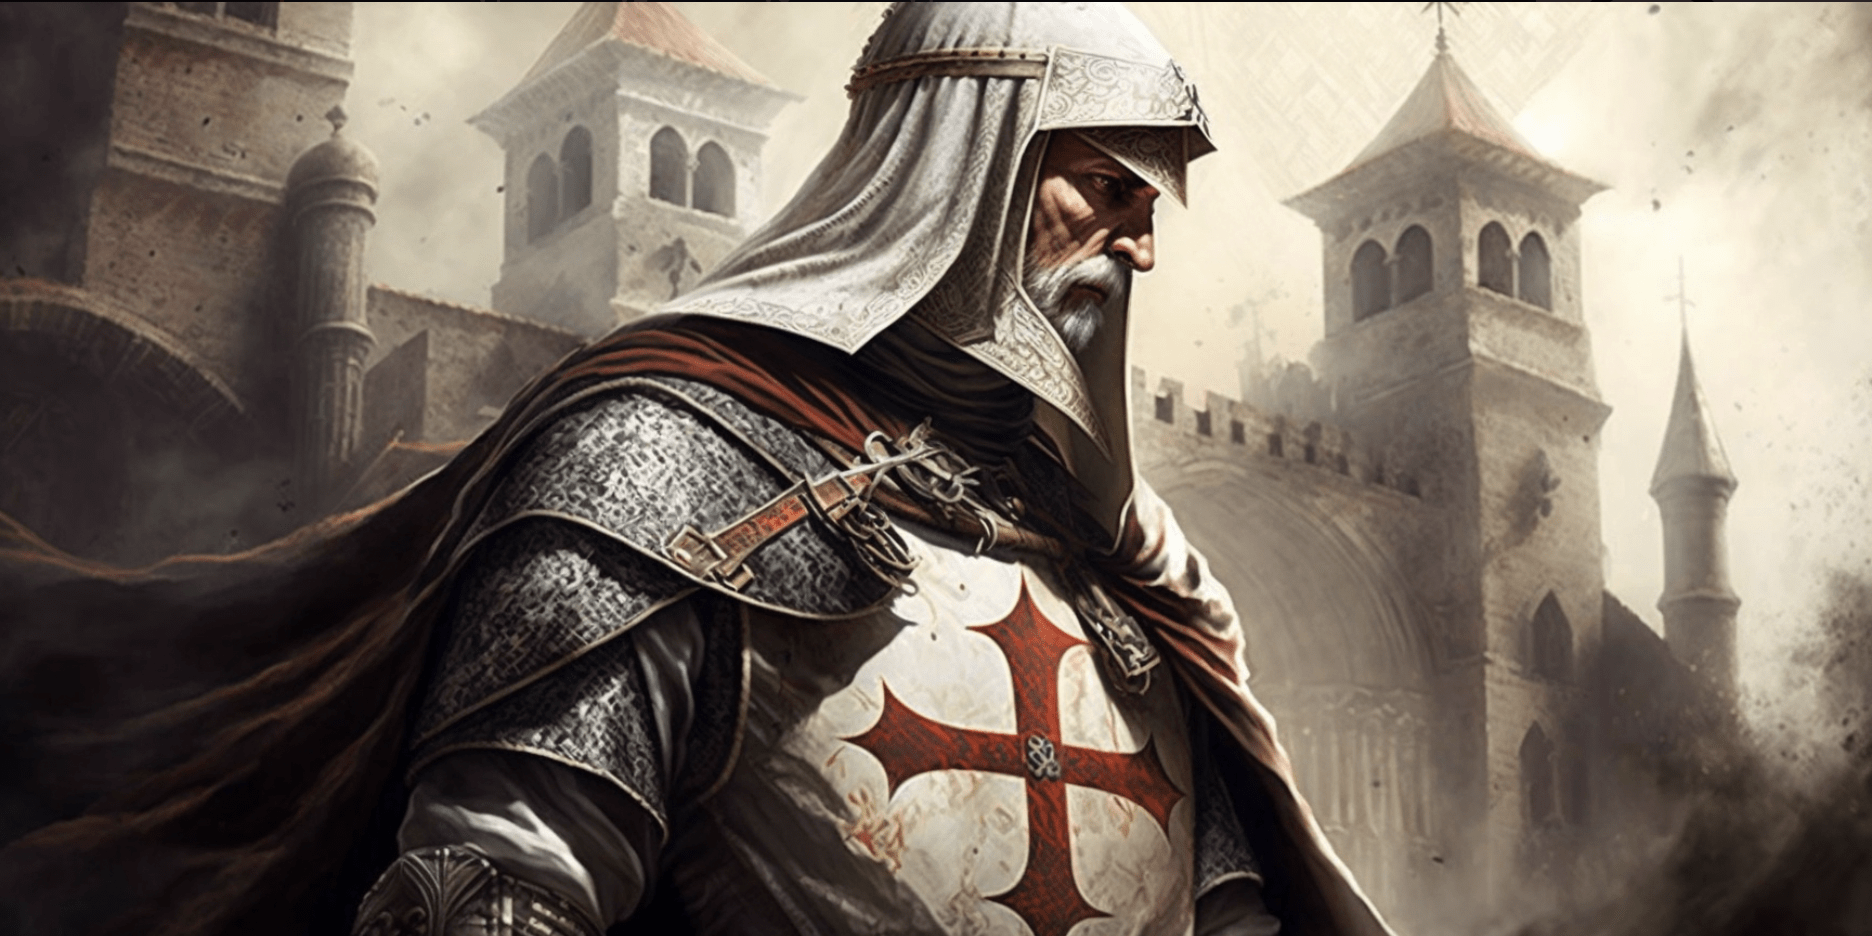 Consumed by flames  The Last Grand-Master of the Knights Templar